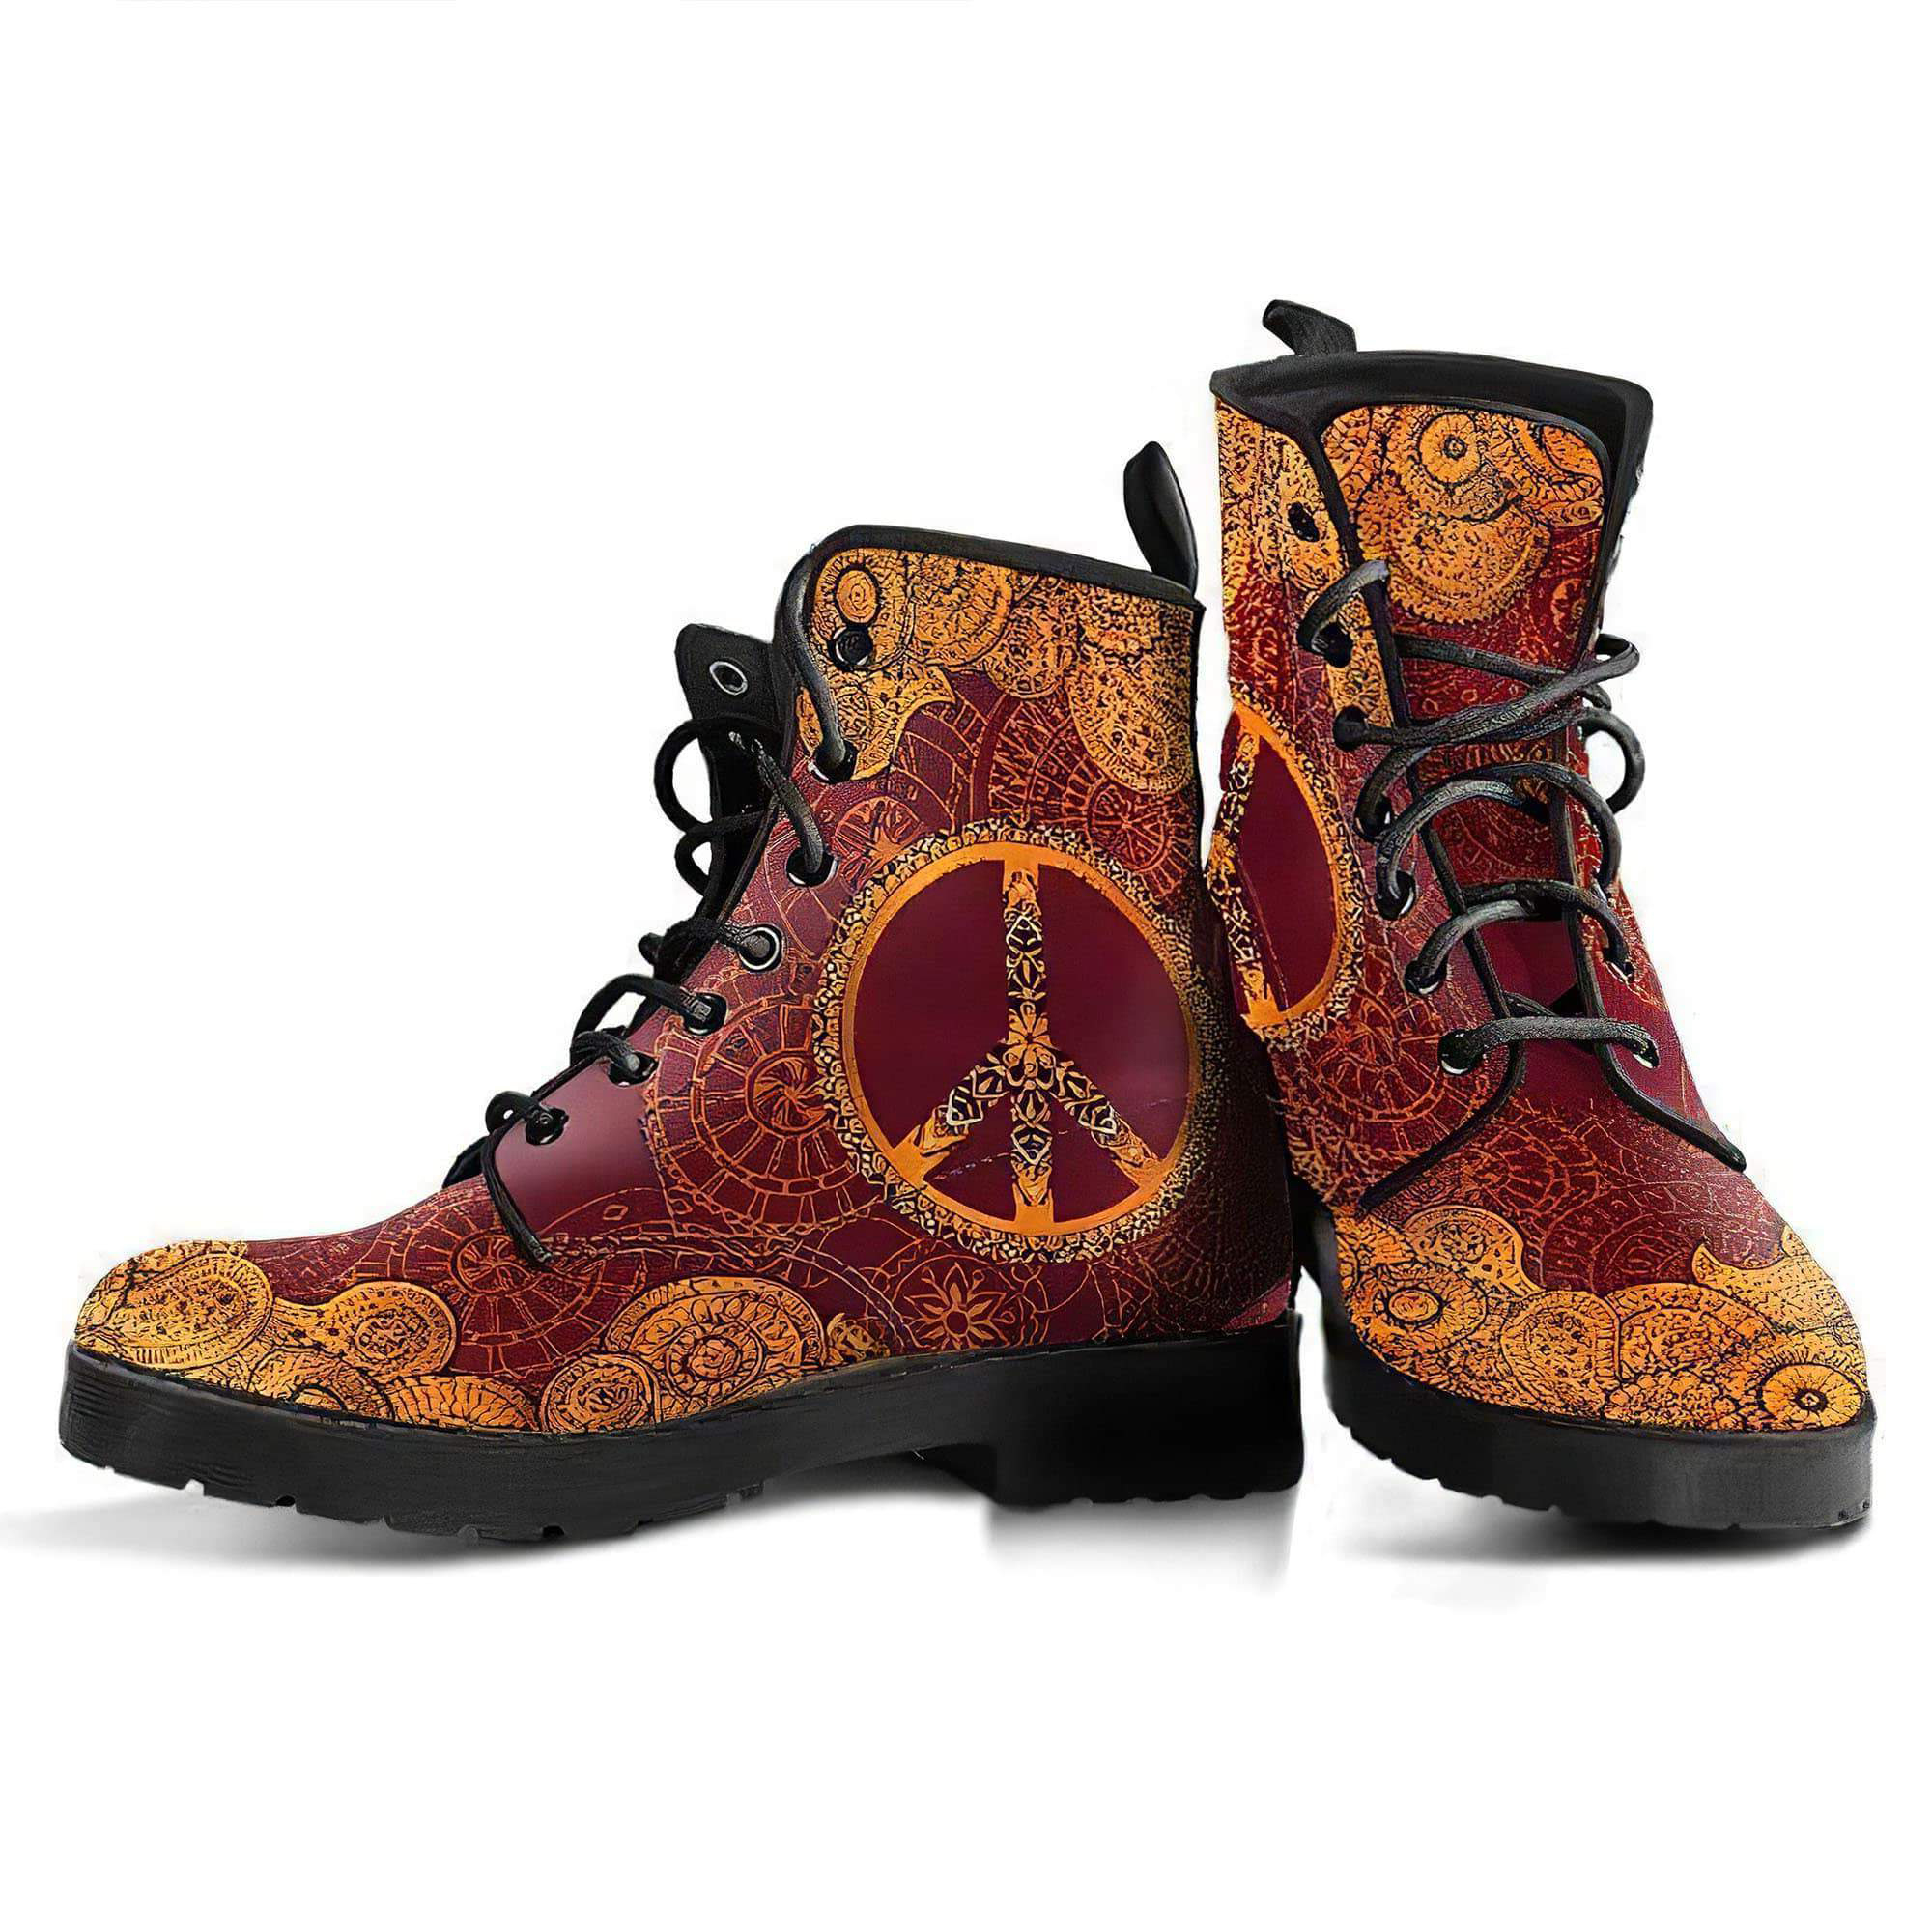 peace-henna-women-s-boots-vegan-friendly-leather-women-s-leather-boots-12051924910141.jpg